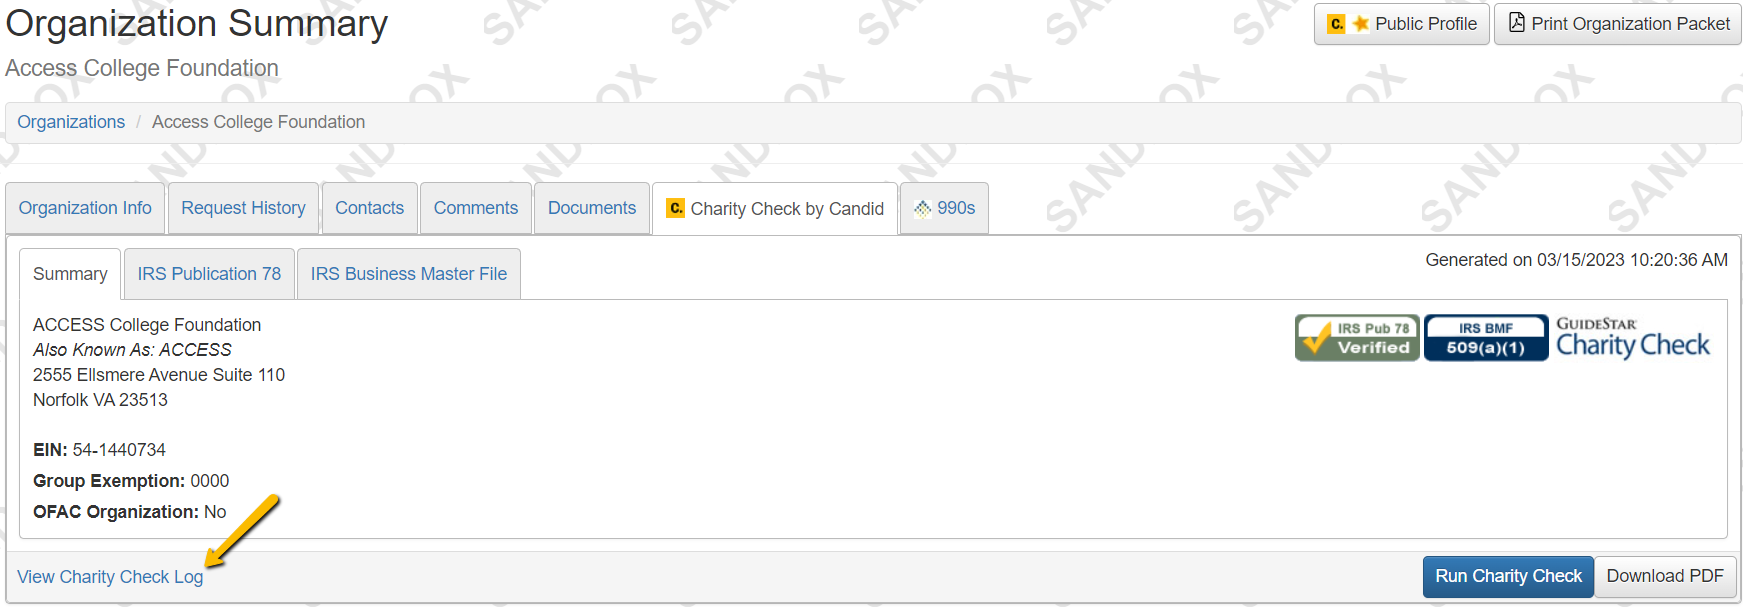 view charity check log link